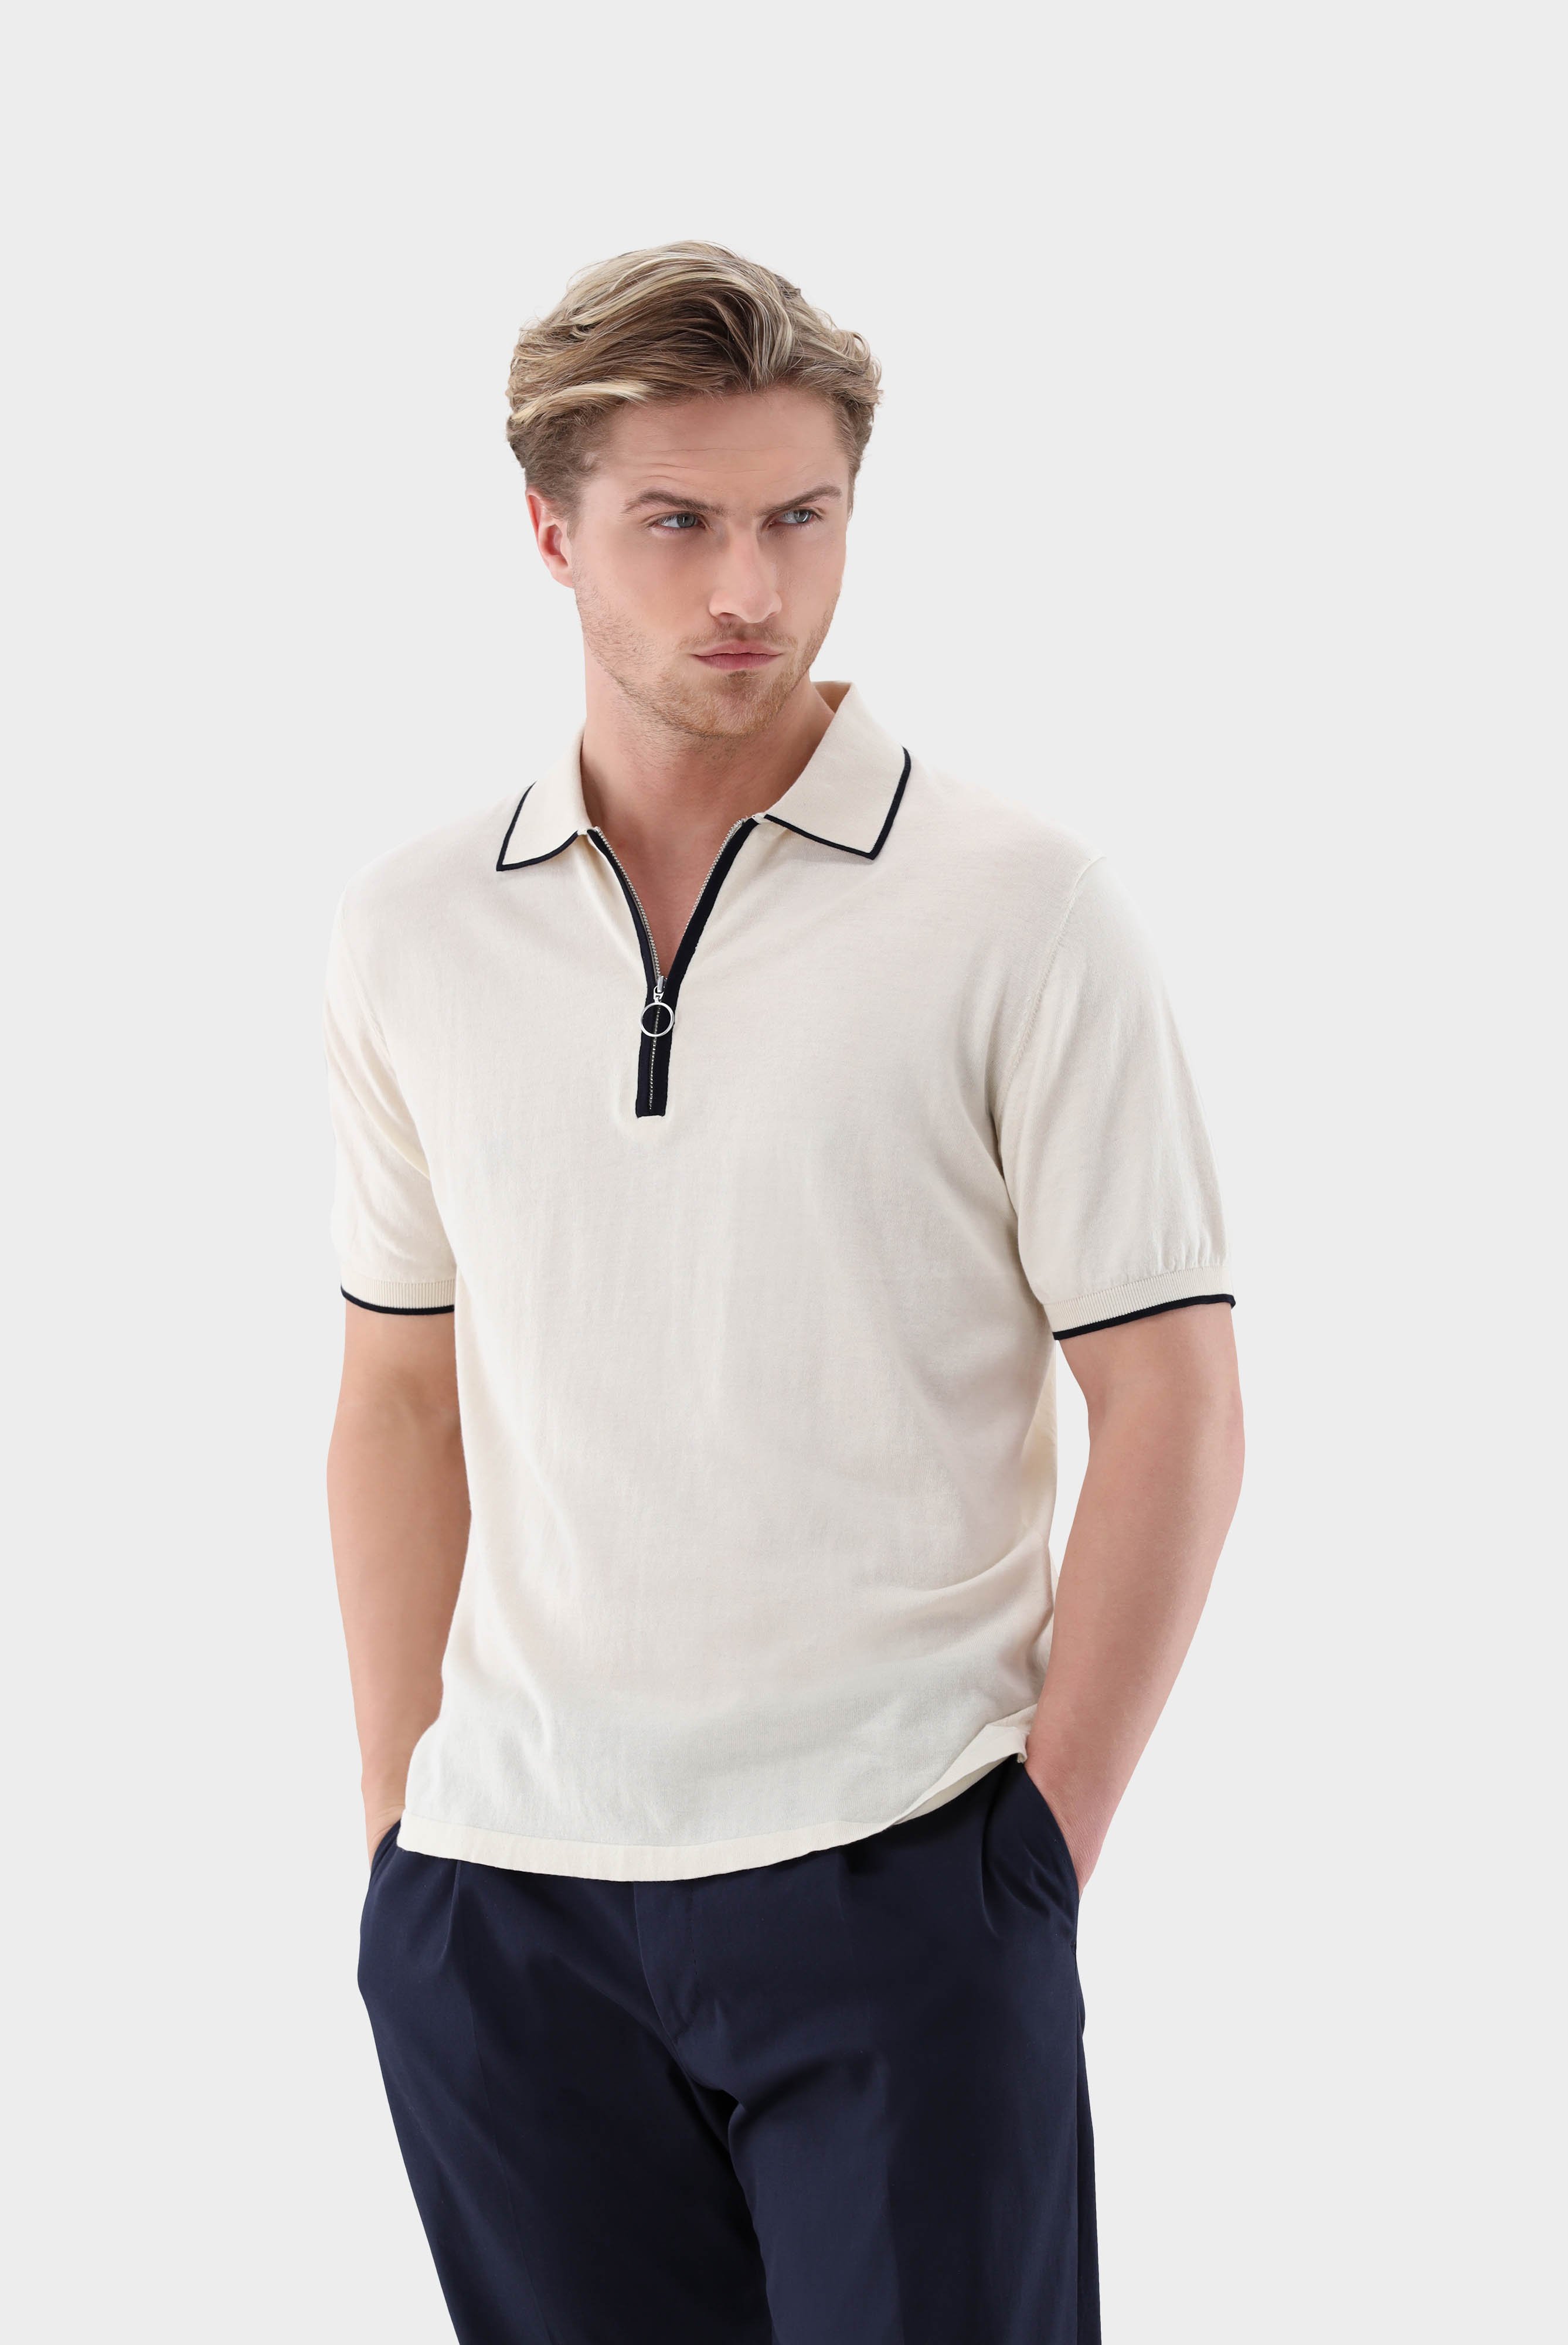 Poloshirts+Zip Knit-Polo in Air Cotton+82.8647.S7.S00174.120.L